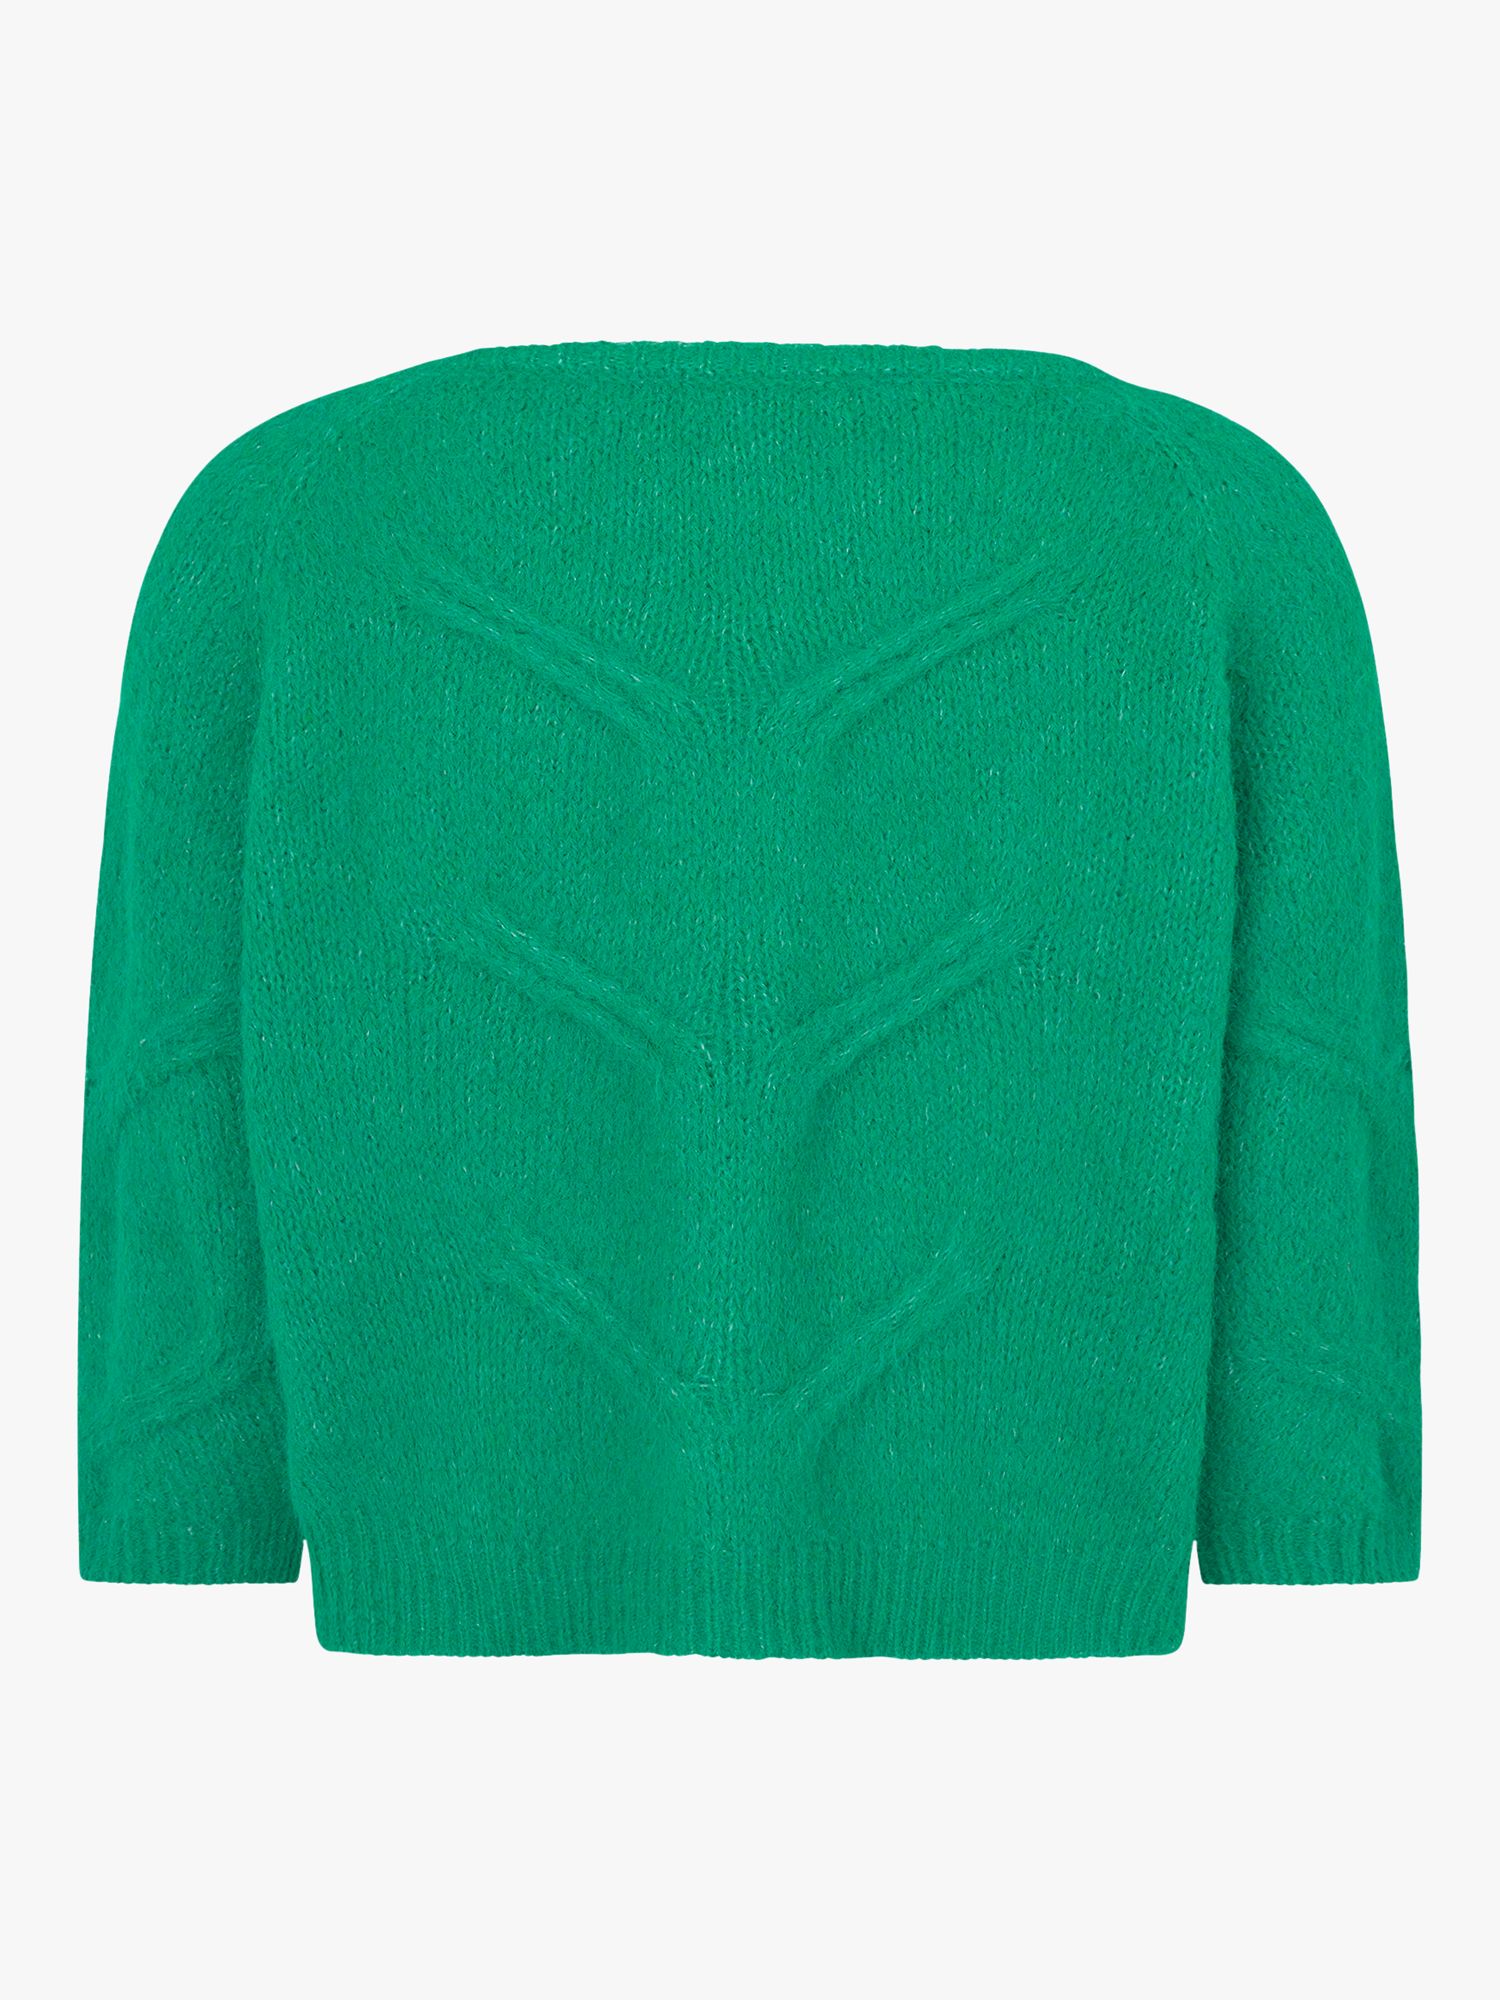 Lollys Laundry Tortuga Relaxed Fit Jumper, Emerald Green, XS